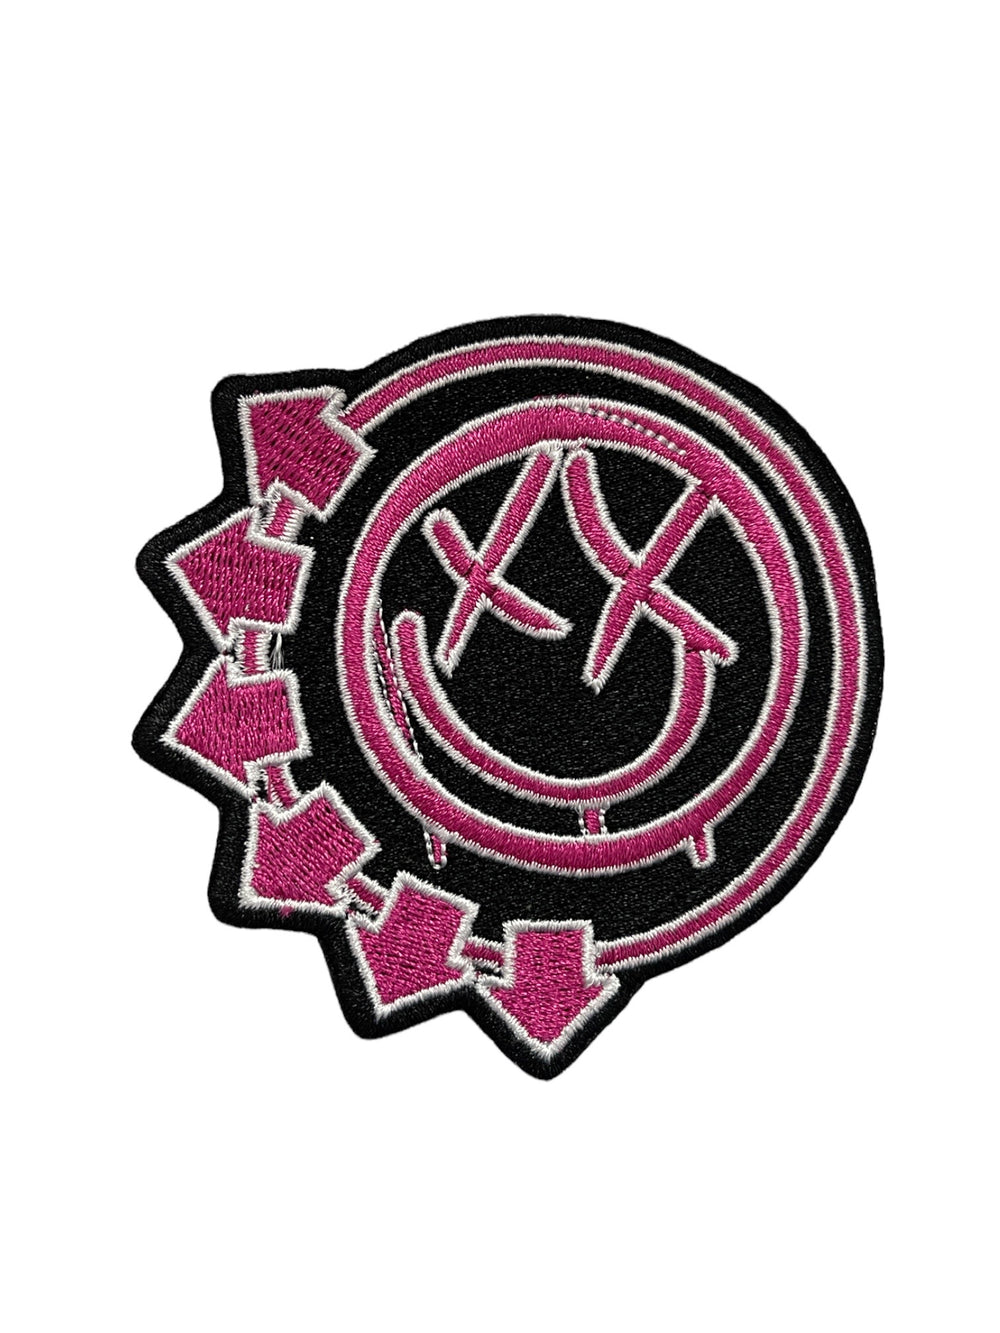 Blink 182 Big Smile Official Woven Patch Brand New